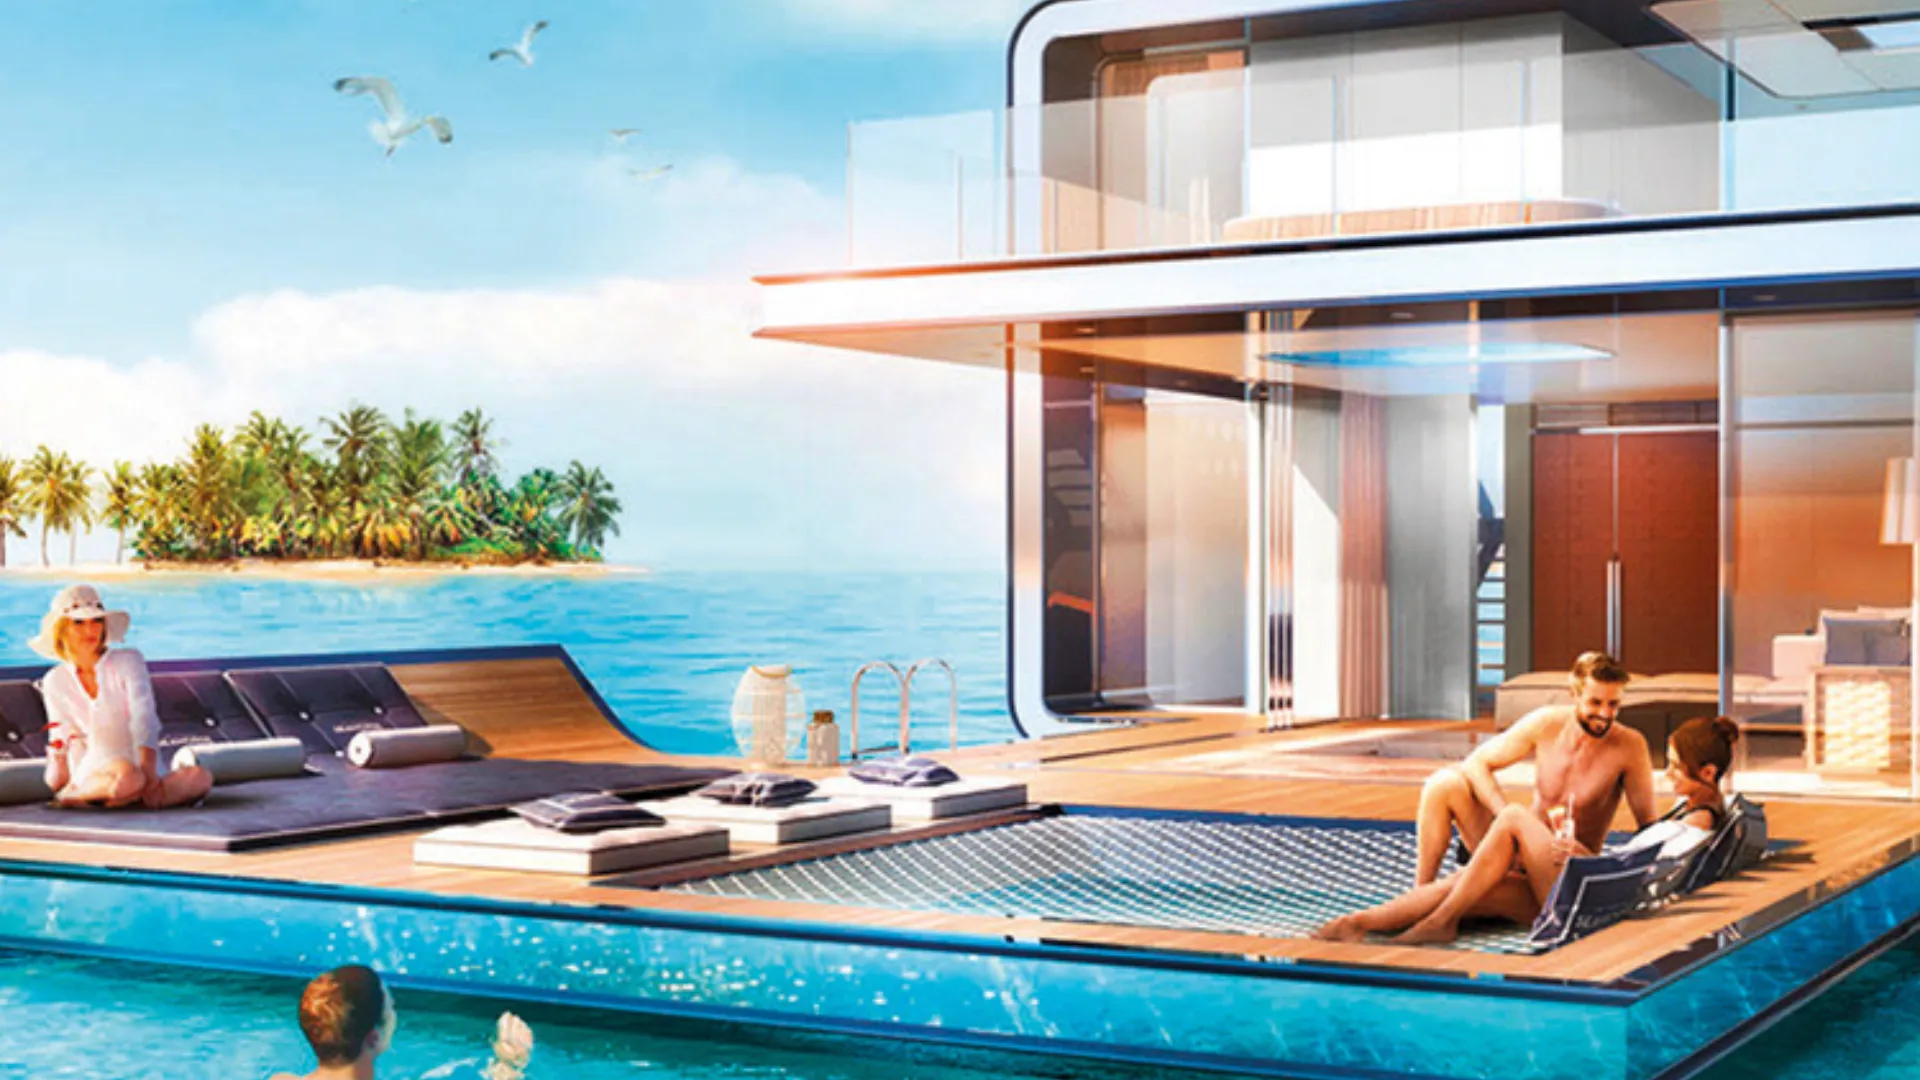 The World Islands 2 Bed Floating Seahorse Property In Dubai - Good ROI_3